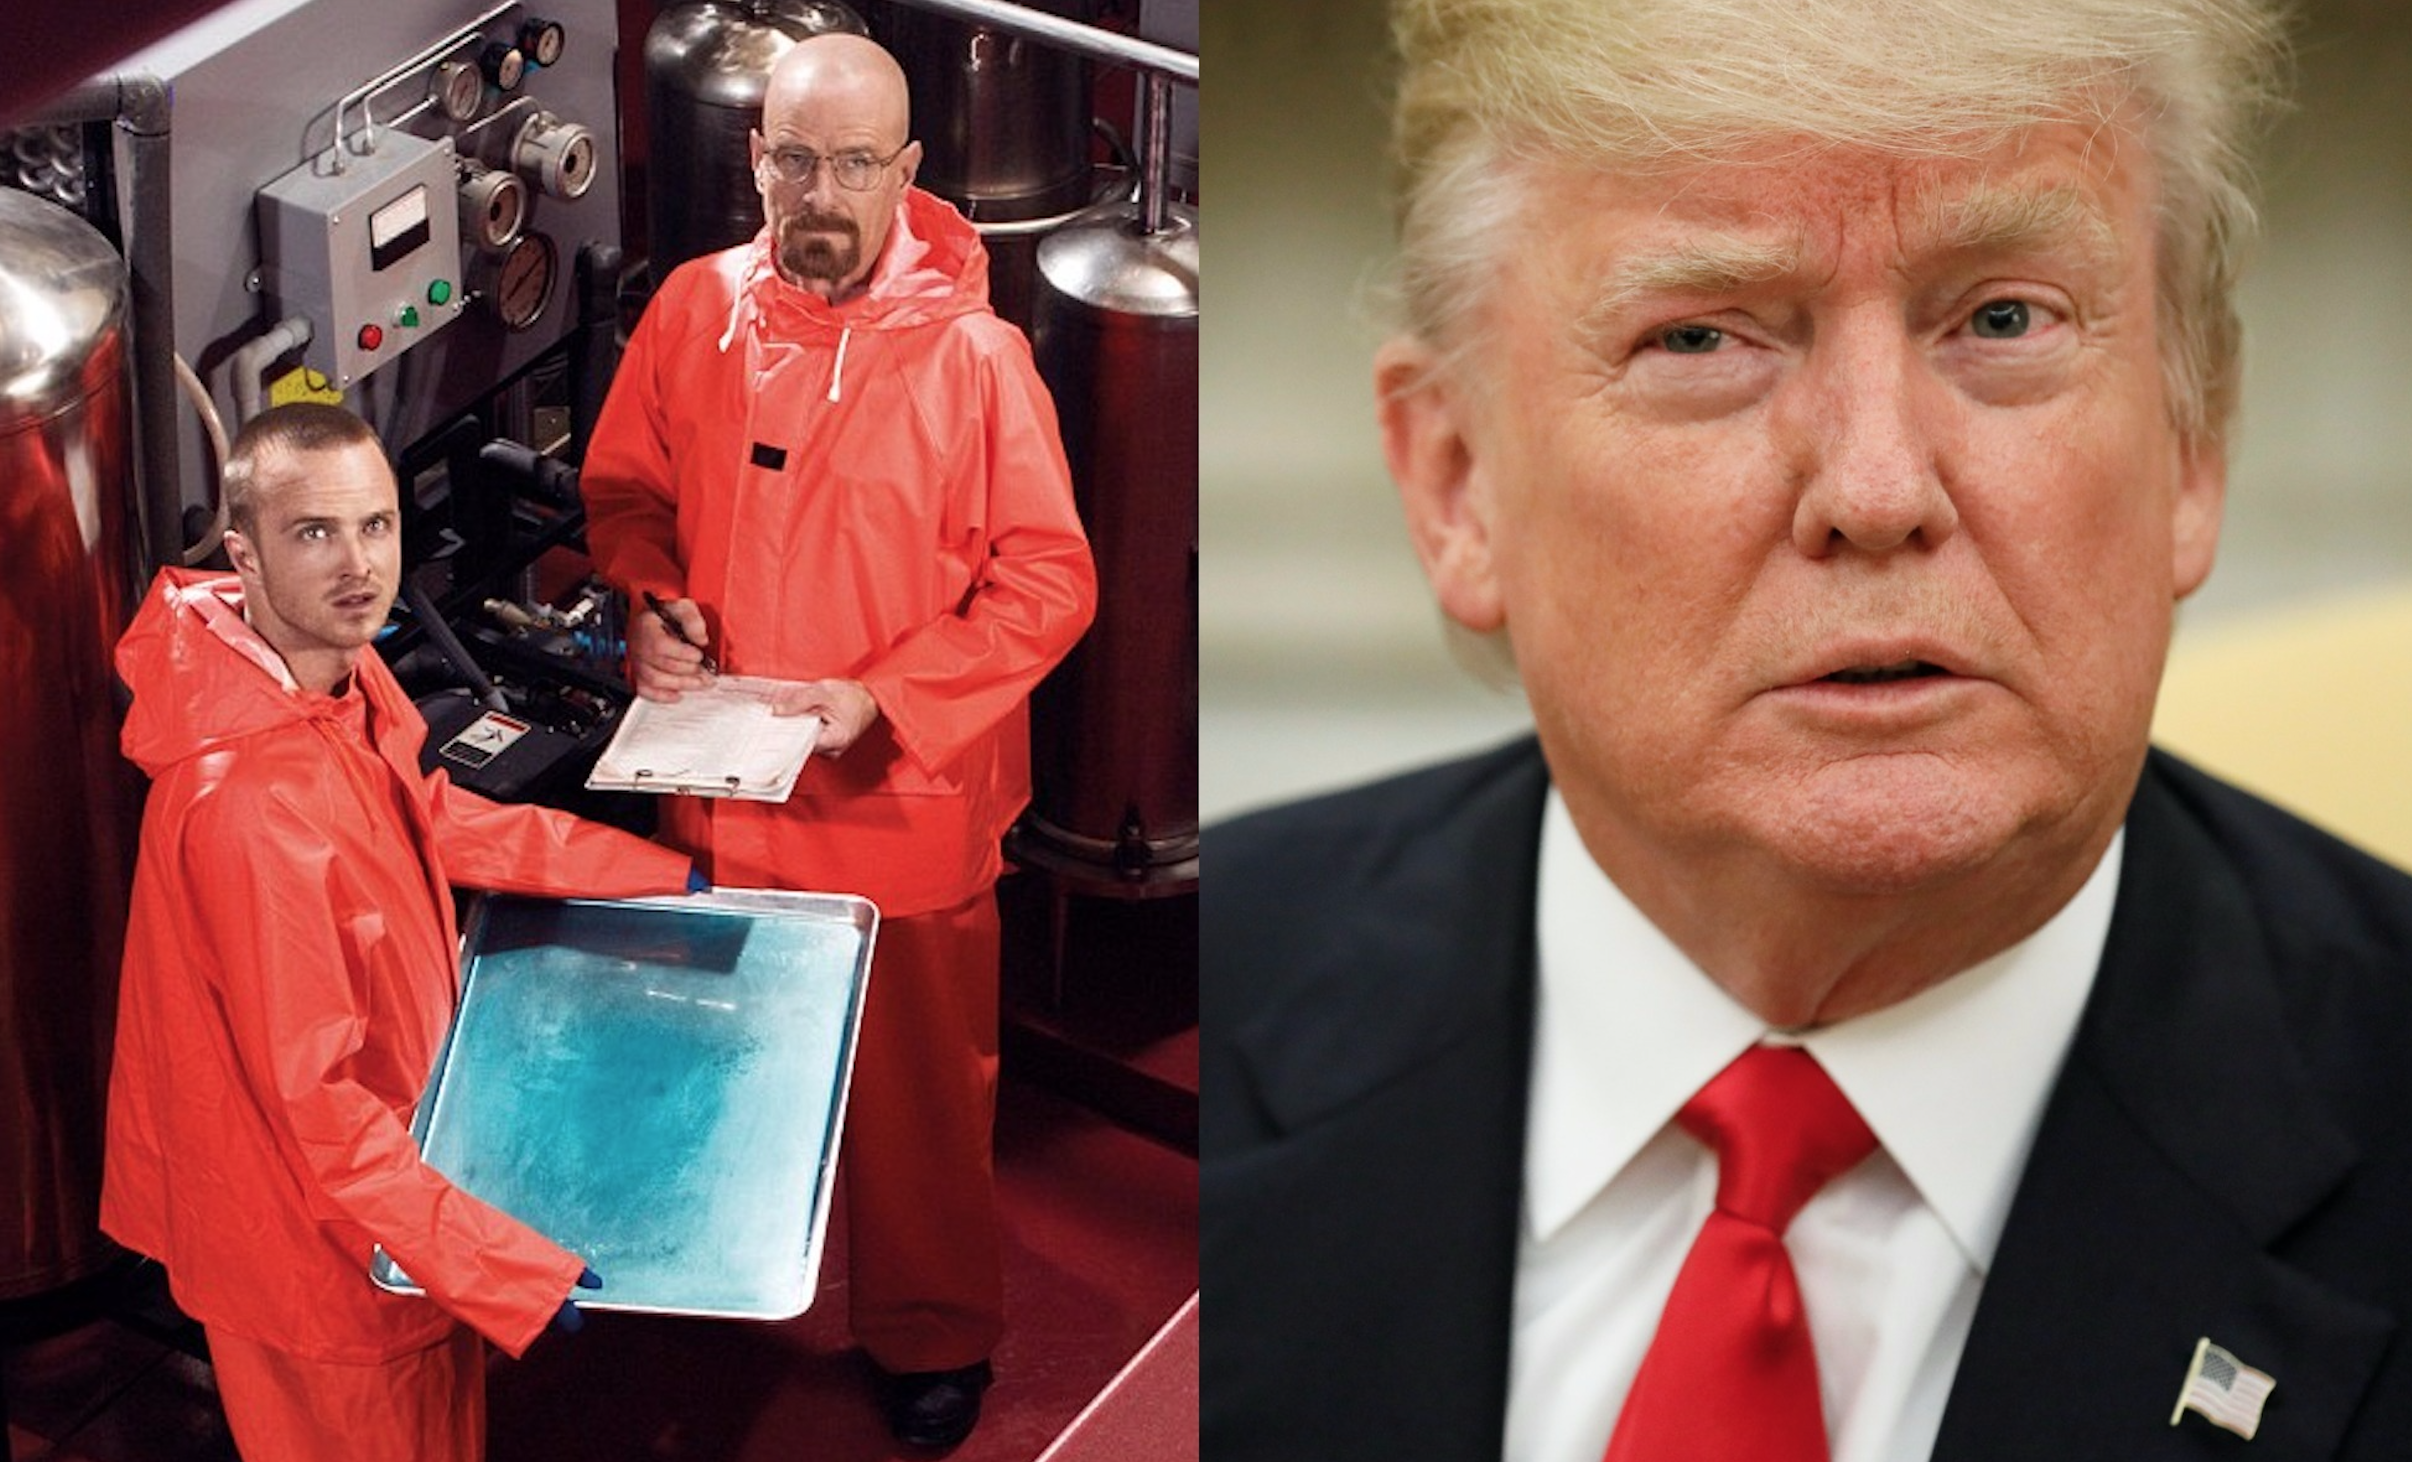 Donald Trump Is Now One of the Most Popular Street Names for Meth photo